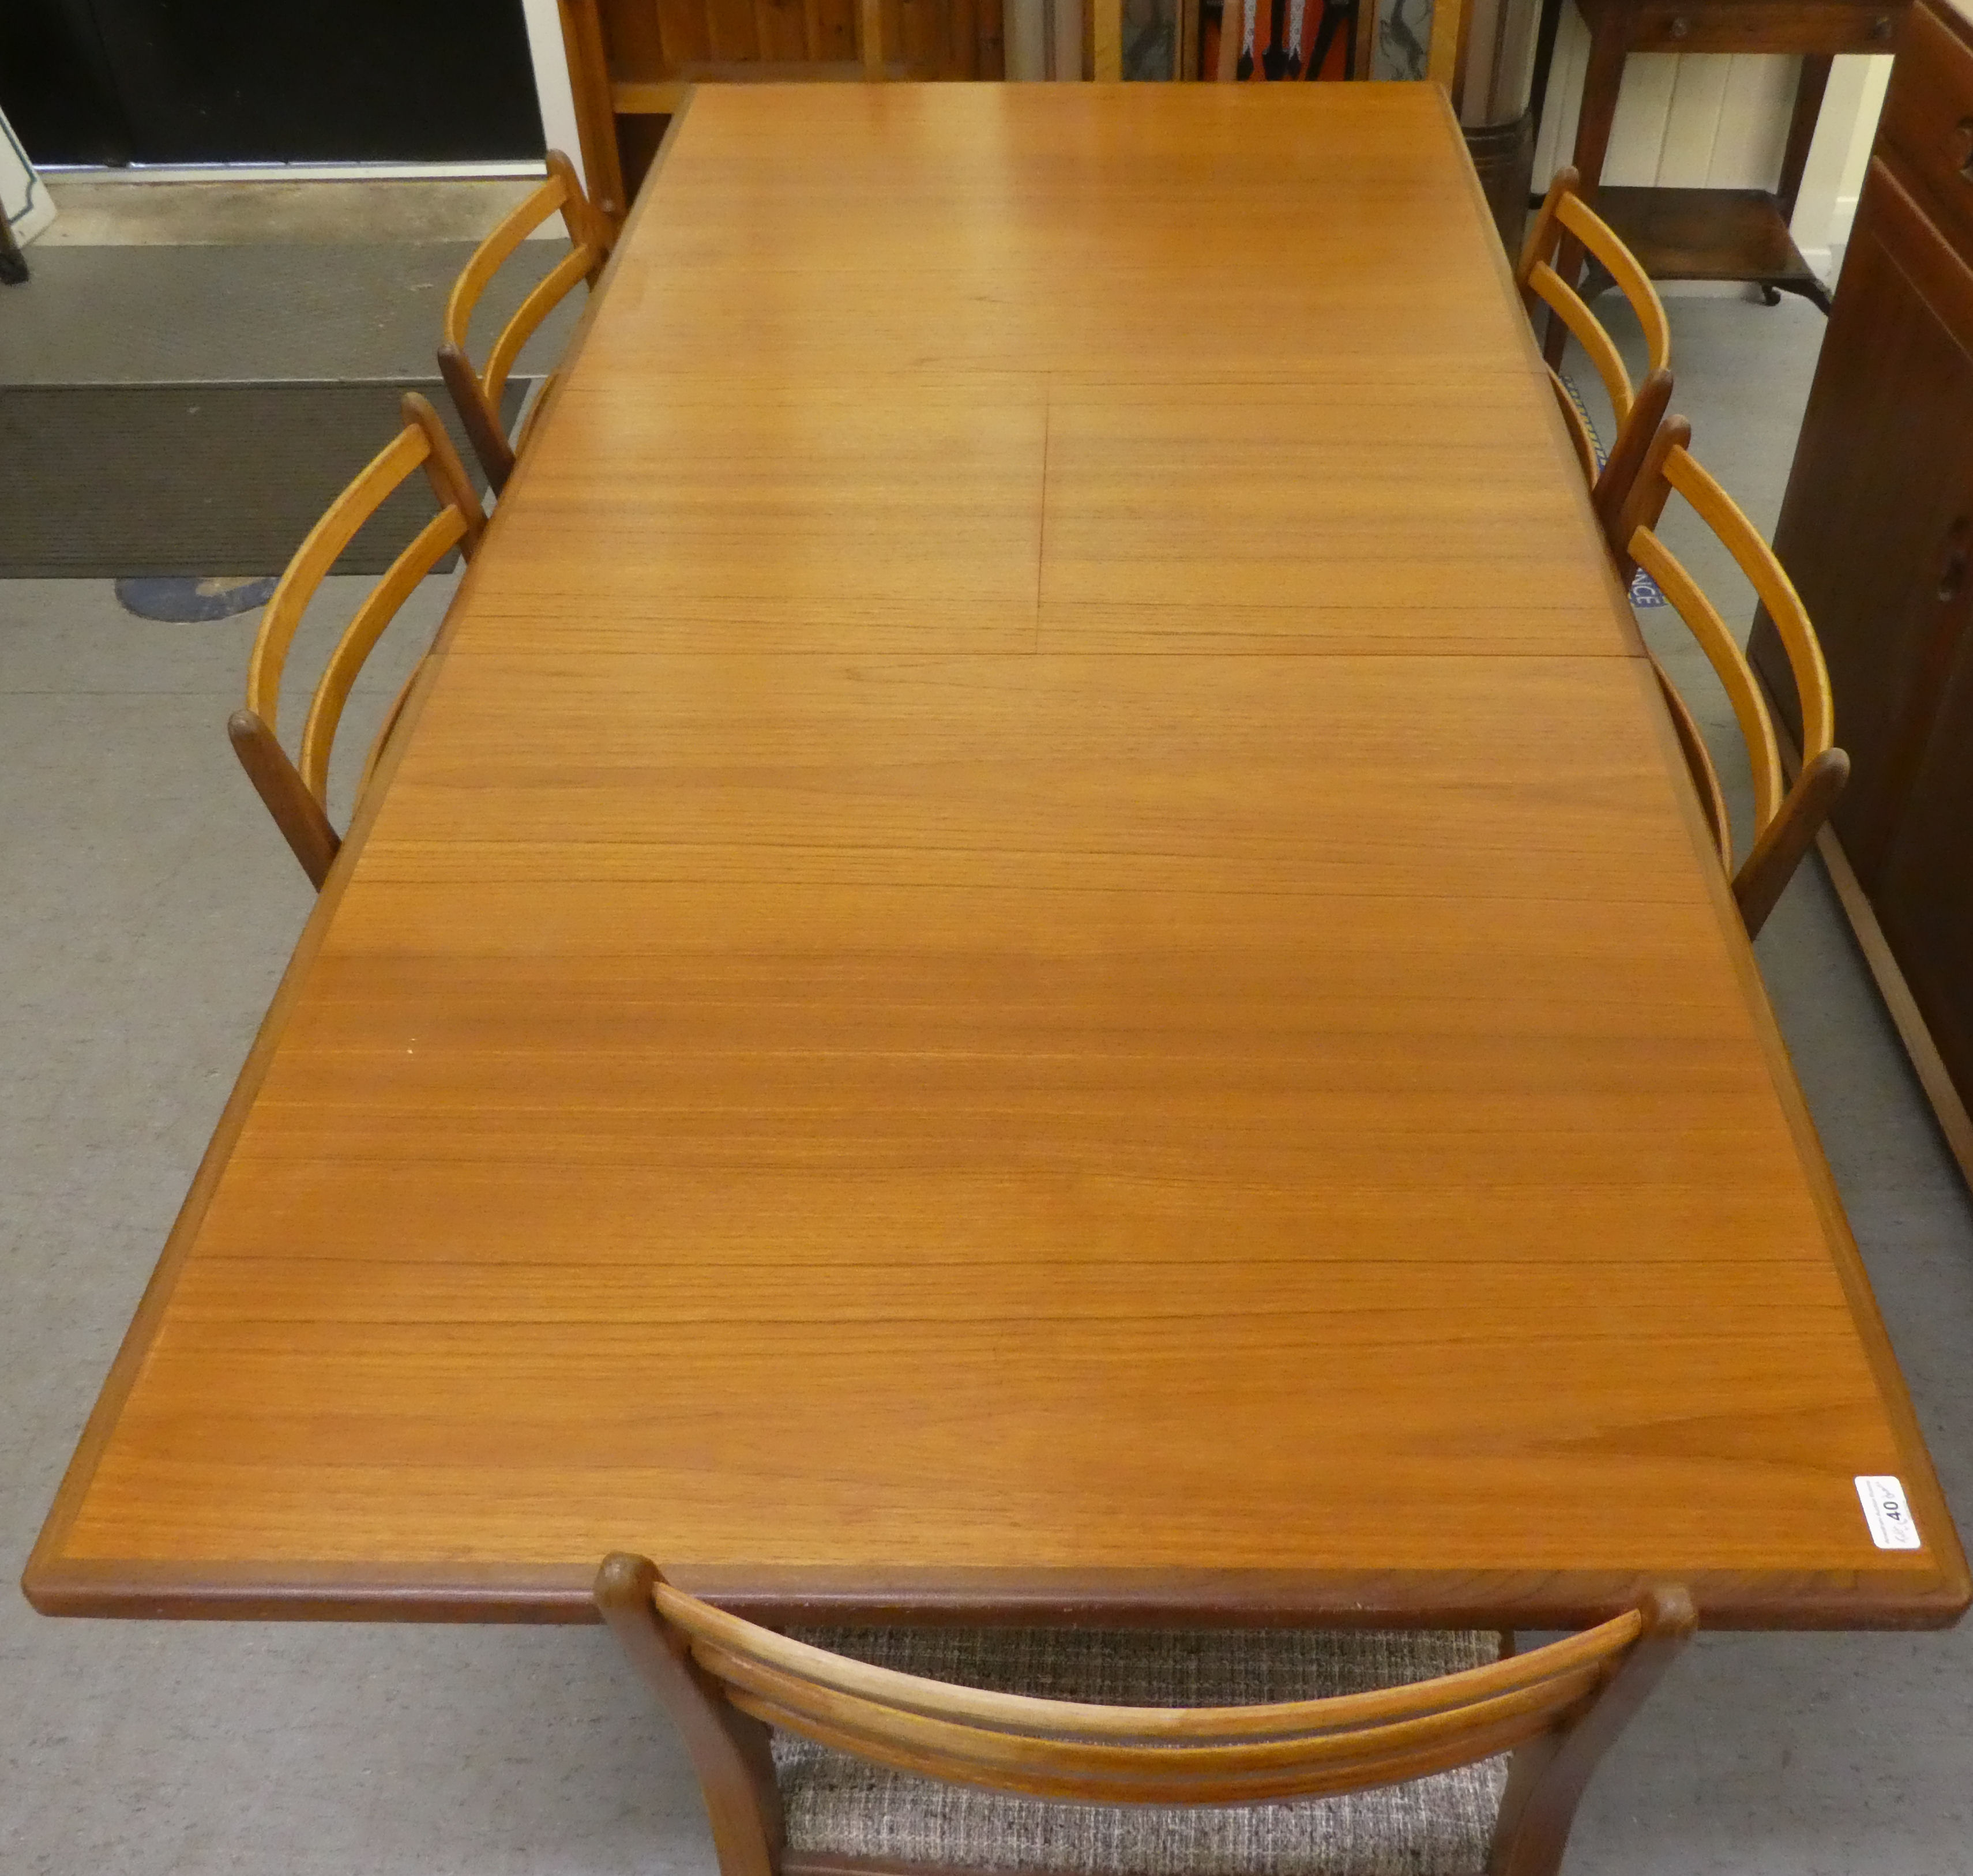 A 1970s teak G-Plan dining table, raised on turned, tapered legs  29"h  62"L extending to 80"L - Image 7 of 8